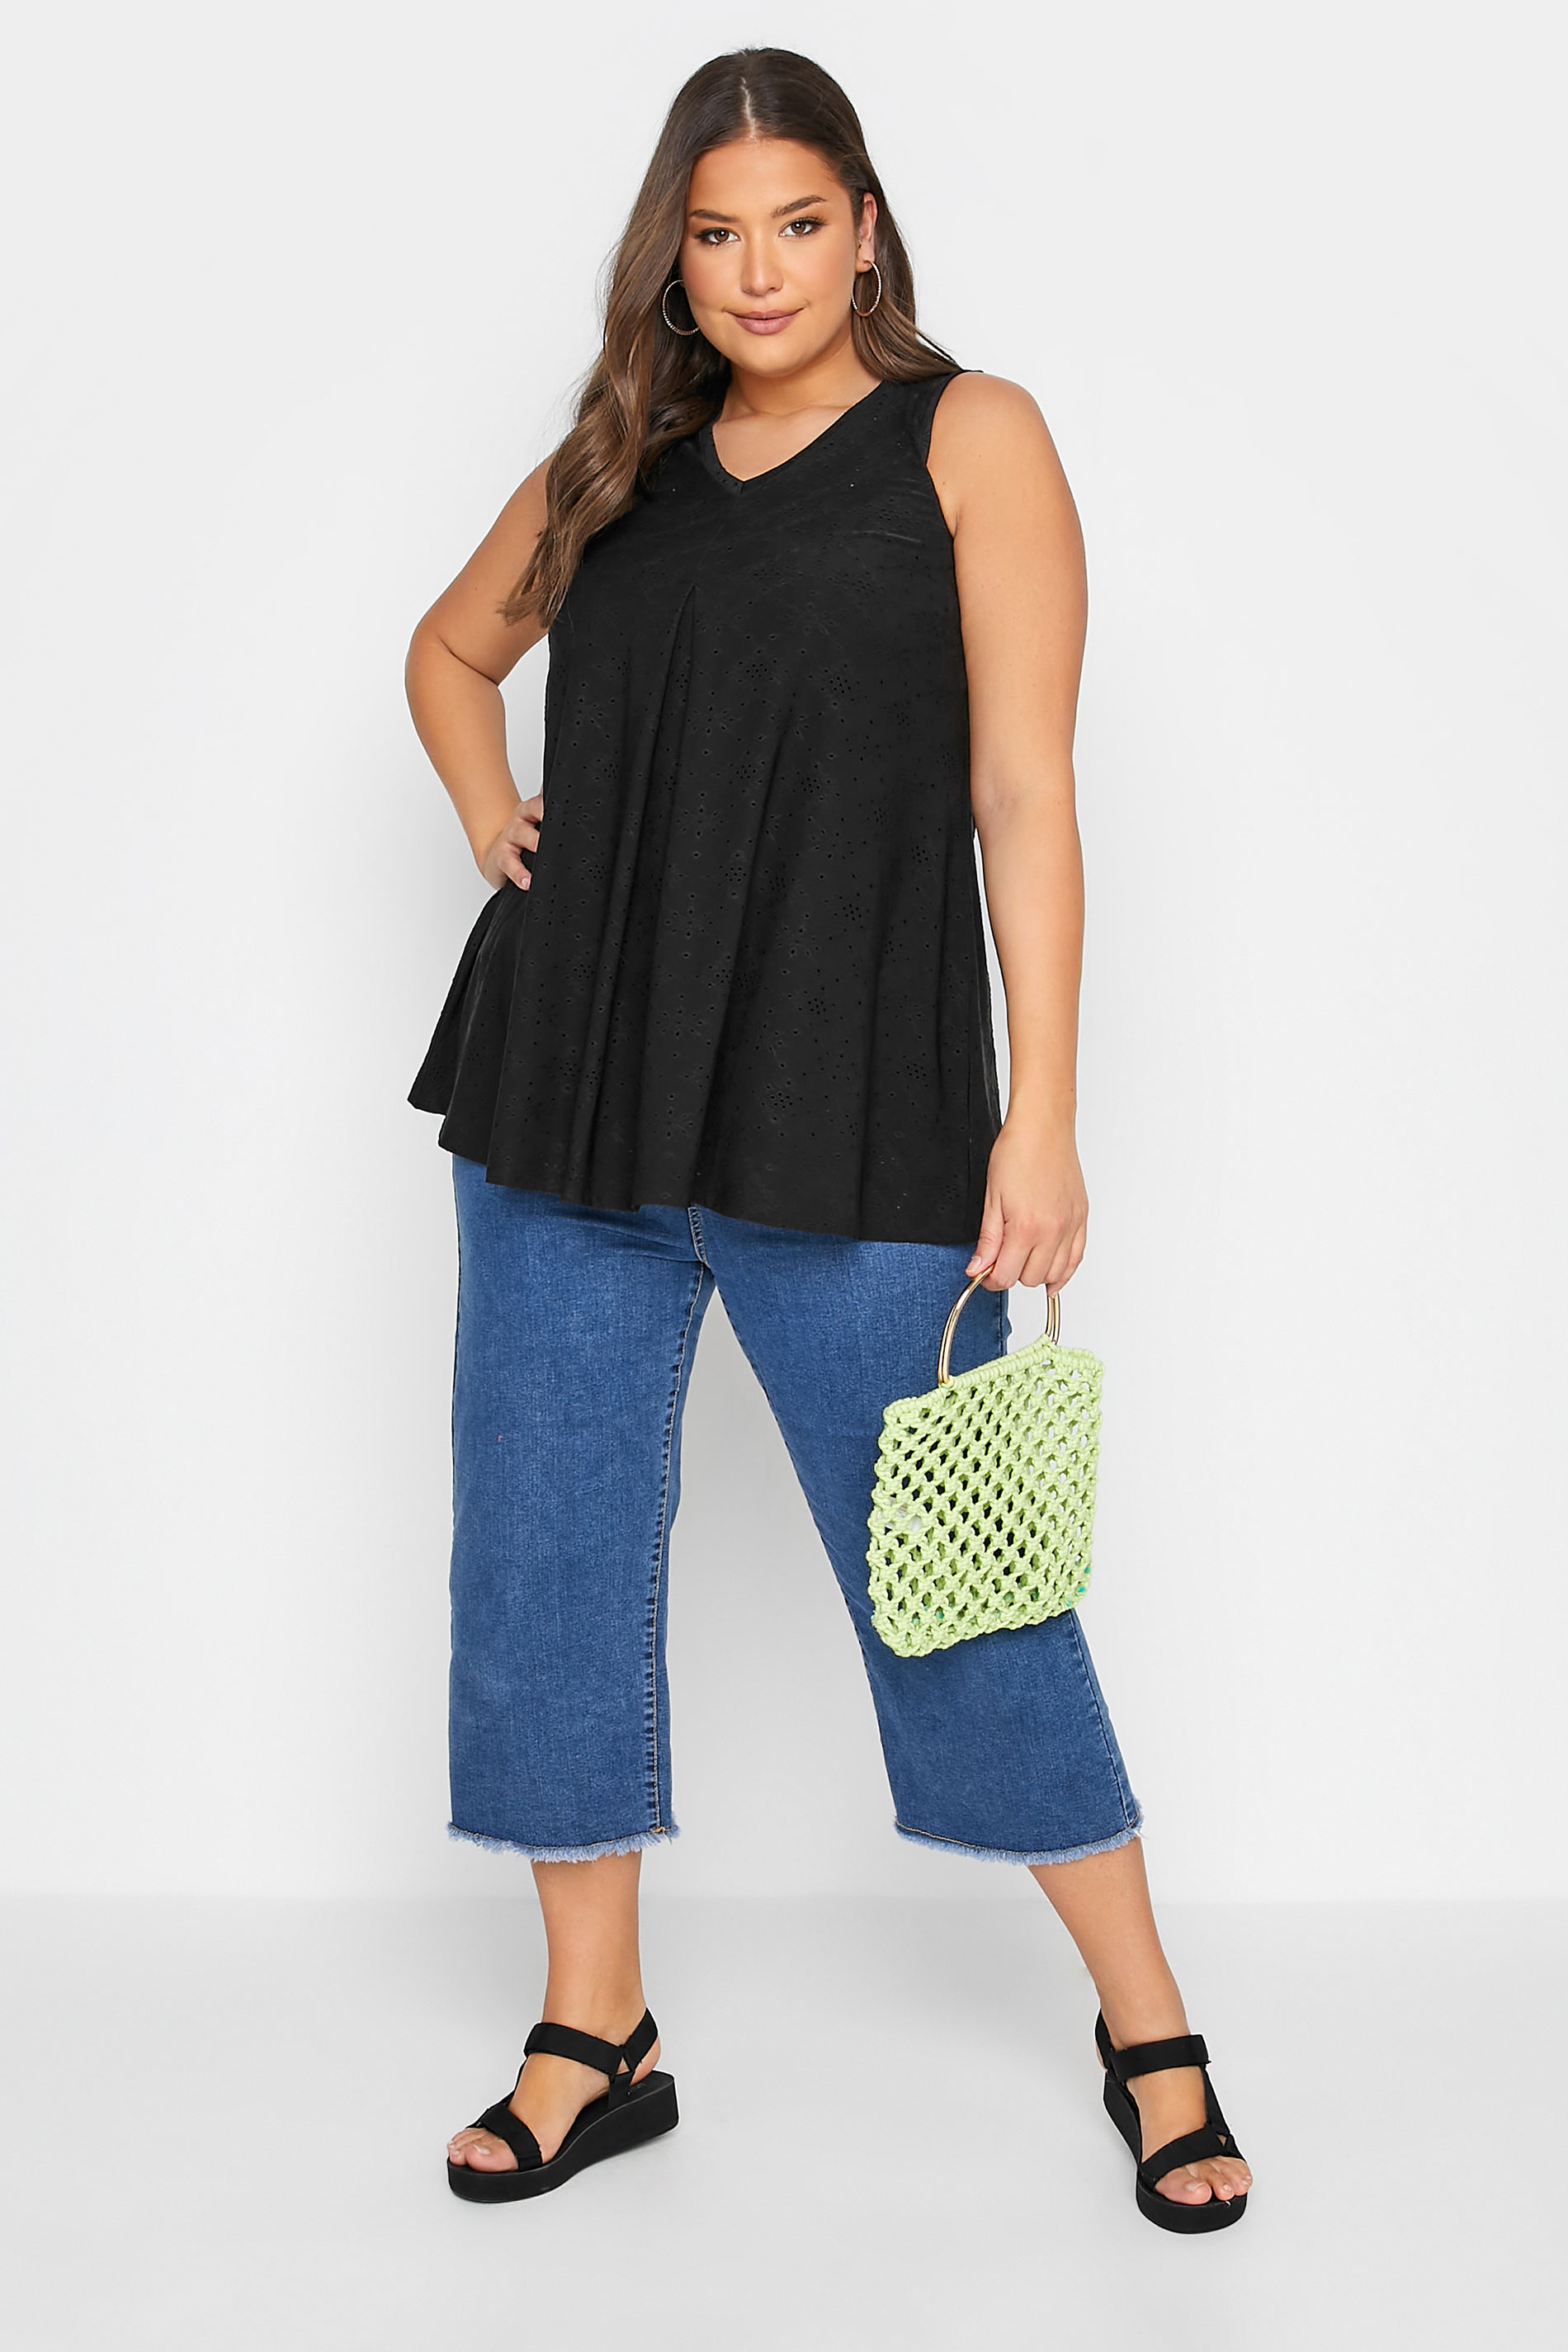 Grande taille  Tops Grande taille  Tops Jersey | Top Volanté Noir Broderie Anglaise - WZ24393